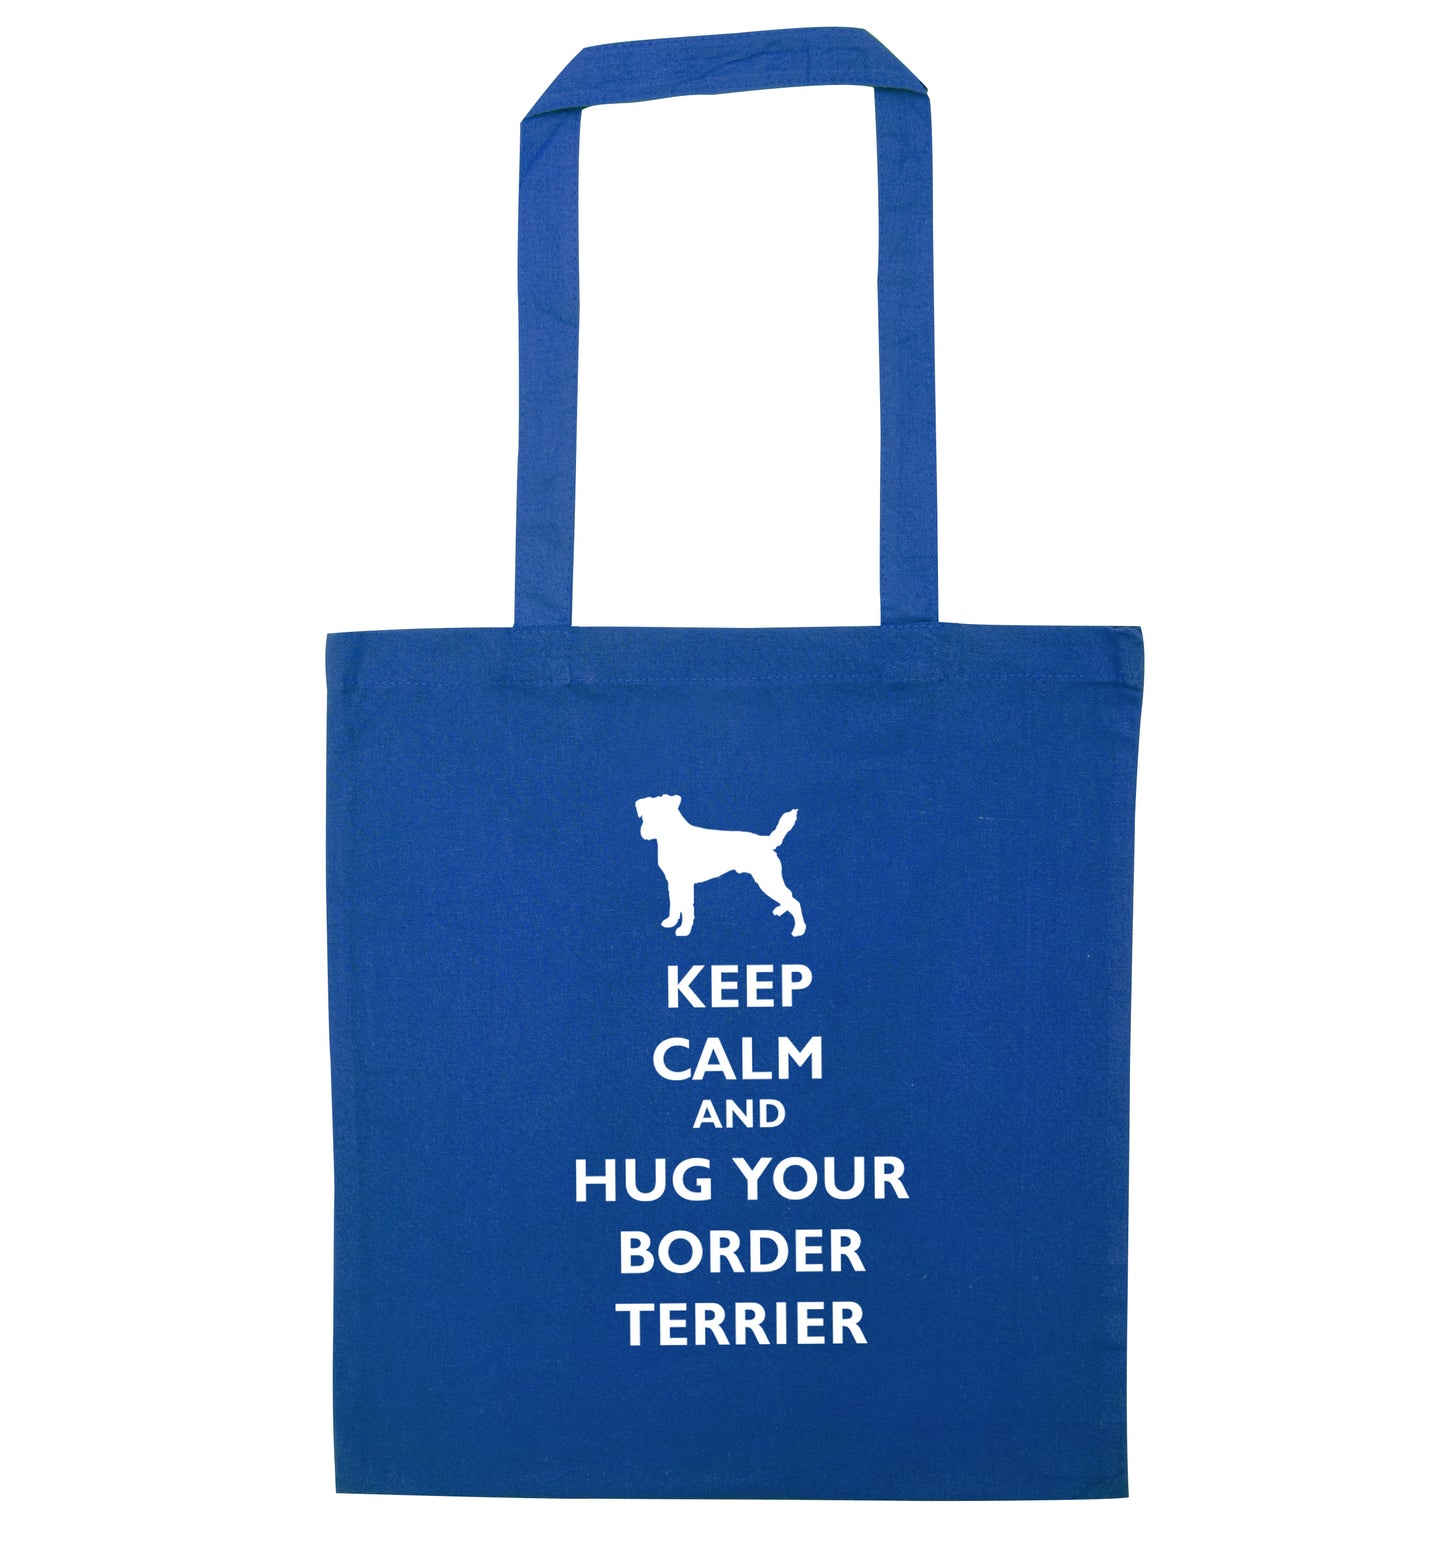 Keep calm and hug your border terrier blue tote bag